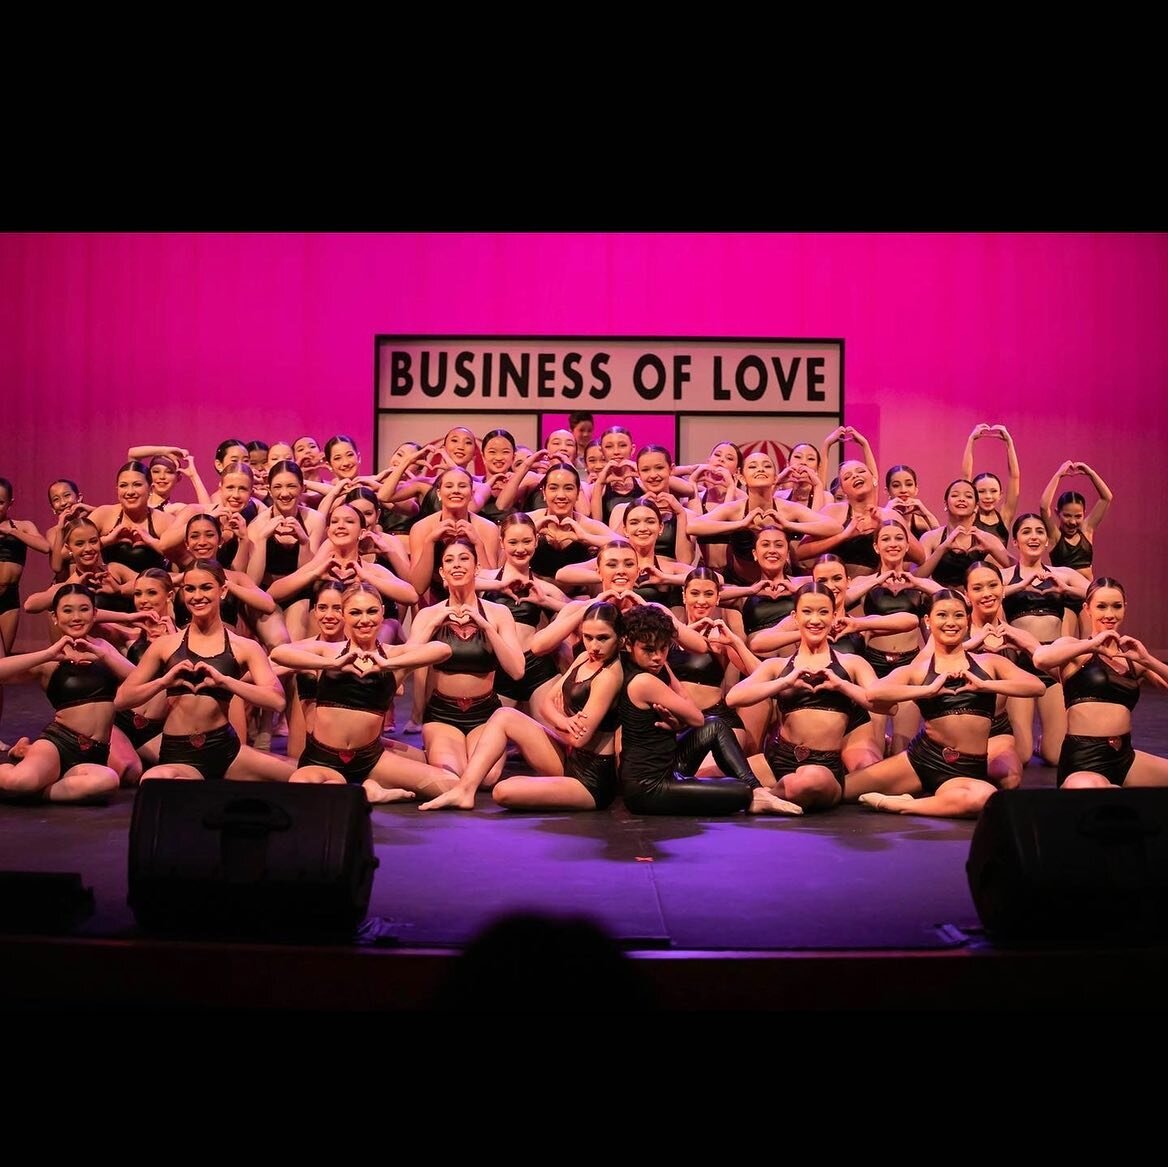 We had an amazing time at Starbound this weekend! One of the highlights was our production, The Business of Love, winning 1st overall with a score of 298.5 out of 300 and winning the &ldquo;Overall Entertainment Award&rdquo; given at the end of the c